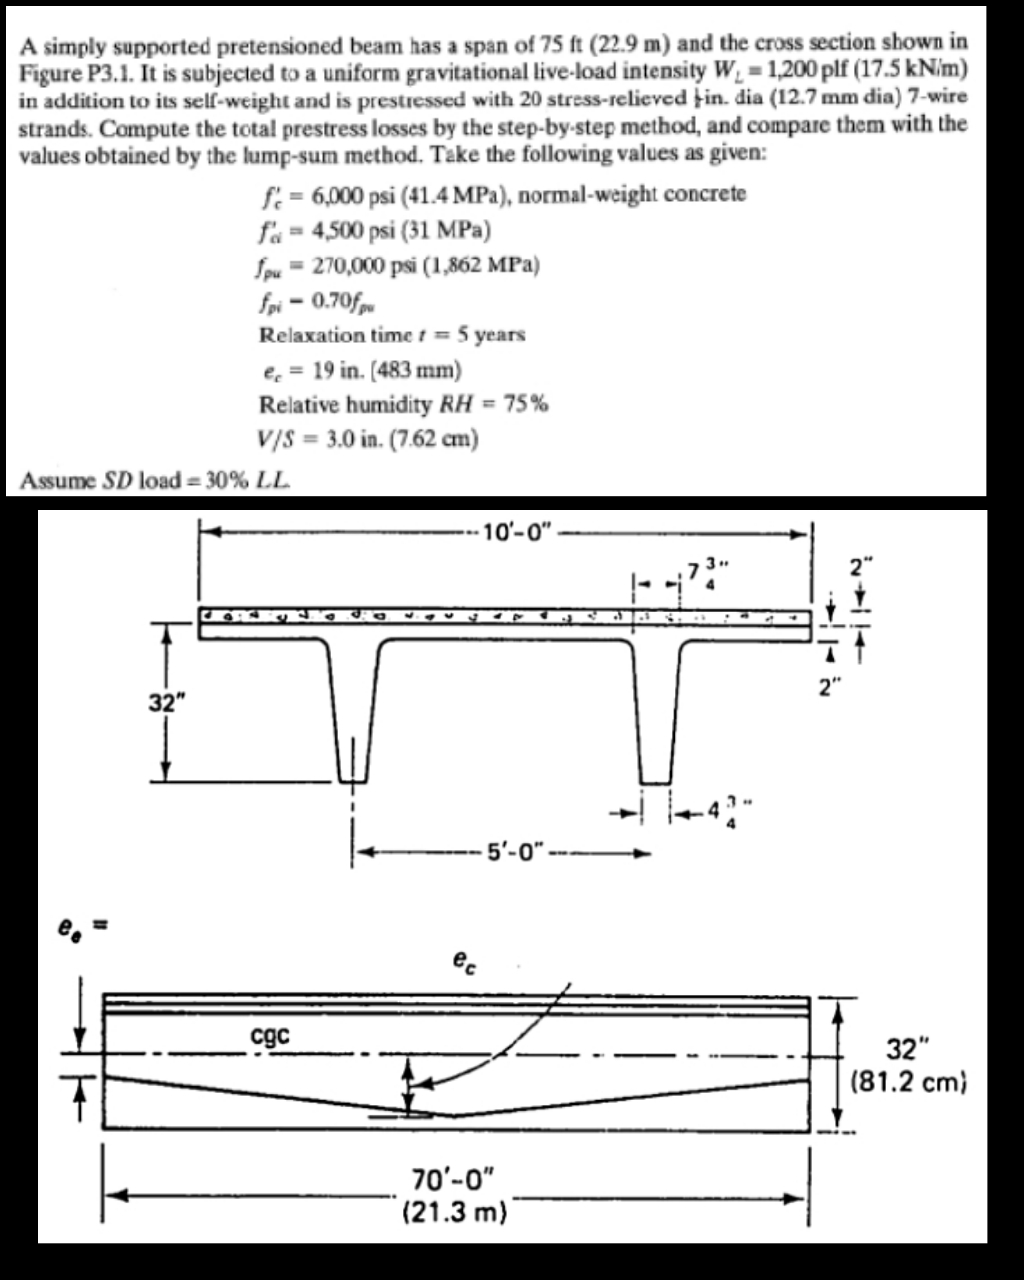 A simply supported pretensioned beam has a span of 75 ft (22.9 m) and the cross section shown in
Figure P3.1. It is subjected to a uniform gravitational live-load intensity W, = 1,200 plf (17.5 kN/m)
in addition to its self-weight and is prestressed with 20 stress-relieved þin. dia (12.7 mm dia) 7-wire
strands. Compute the total prestress losses by the step-by-step method, and compare them with the
values obtained by the lump-sum method. Tāke the following values as given:
f = 6,000 psi (41.4 MPa), normal-weight concrete
f'a = 4,500 psi (31 MPa)
Spu = 270,000 psi (1,862 MPa)
fpi = 0.70fm
Relaxation time t = 5 years
e, = 19 in. (483 mm)
Relative humidity RH = 75%
v/s = 3.0 in. (7.62 cm)
Assume SD load = 30% LL
-10'-0"
32"
5'-0"
ec
cgc
32"
(81.2 cm)
70'-0"
(21.3 m)
